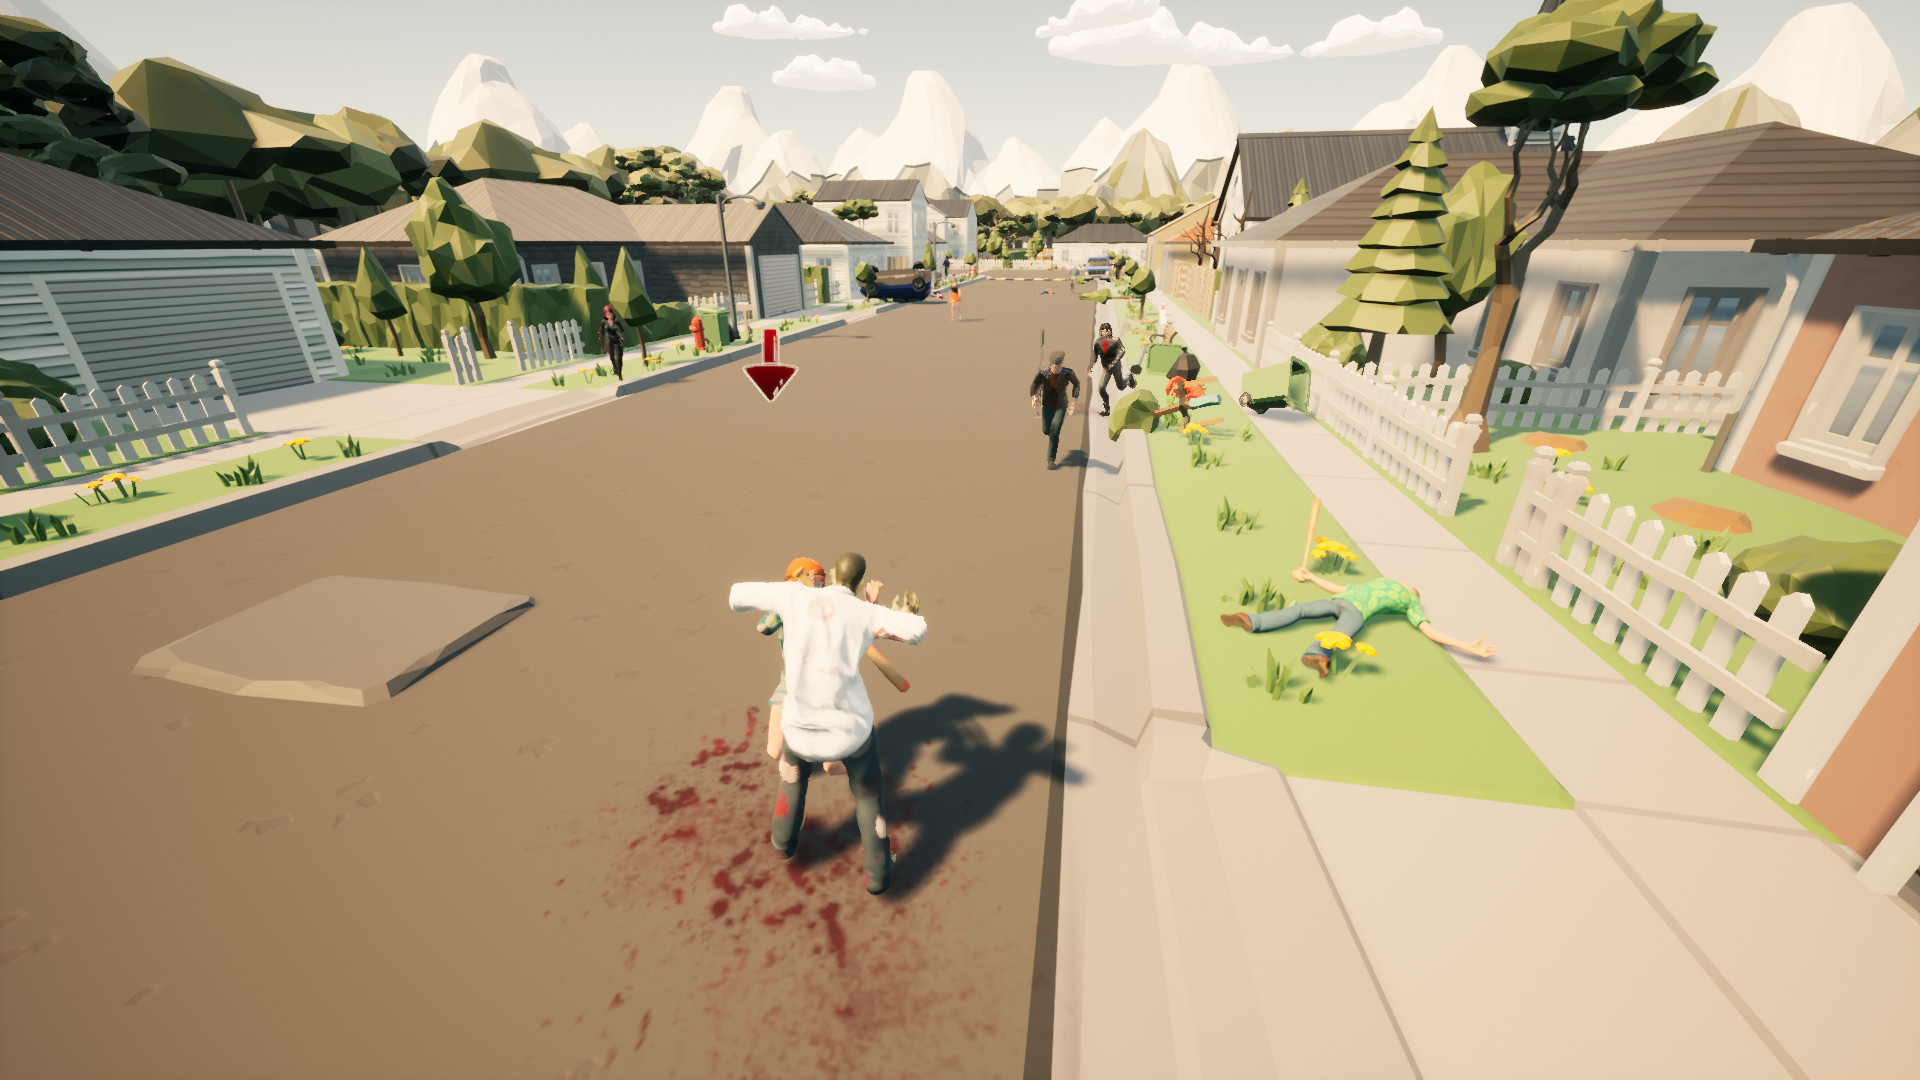 Town Fall Zombie Free Download